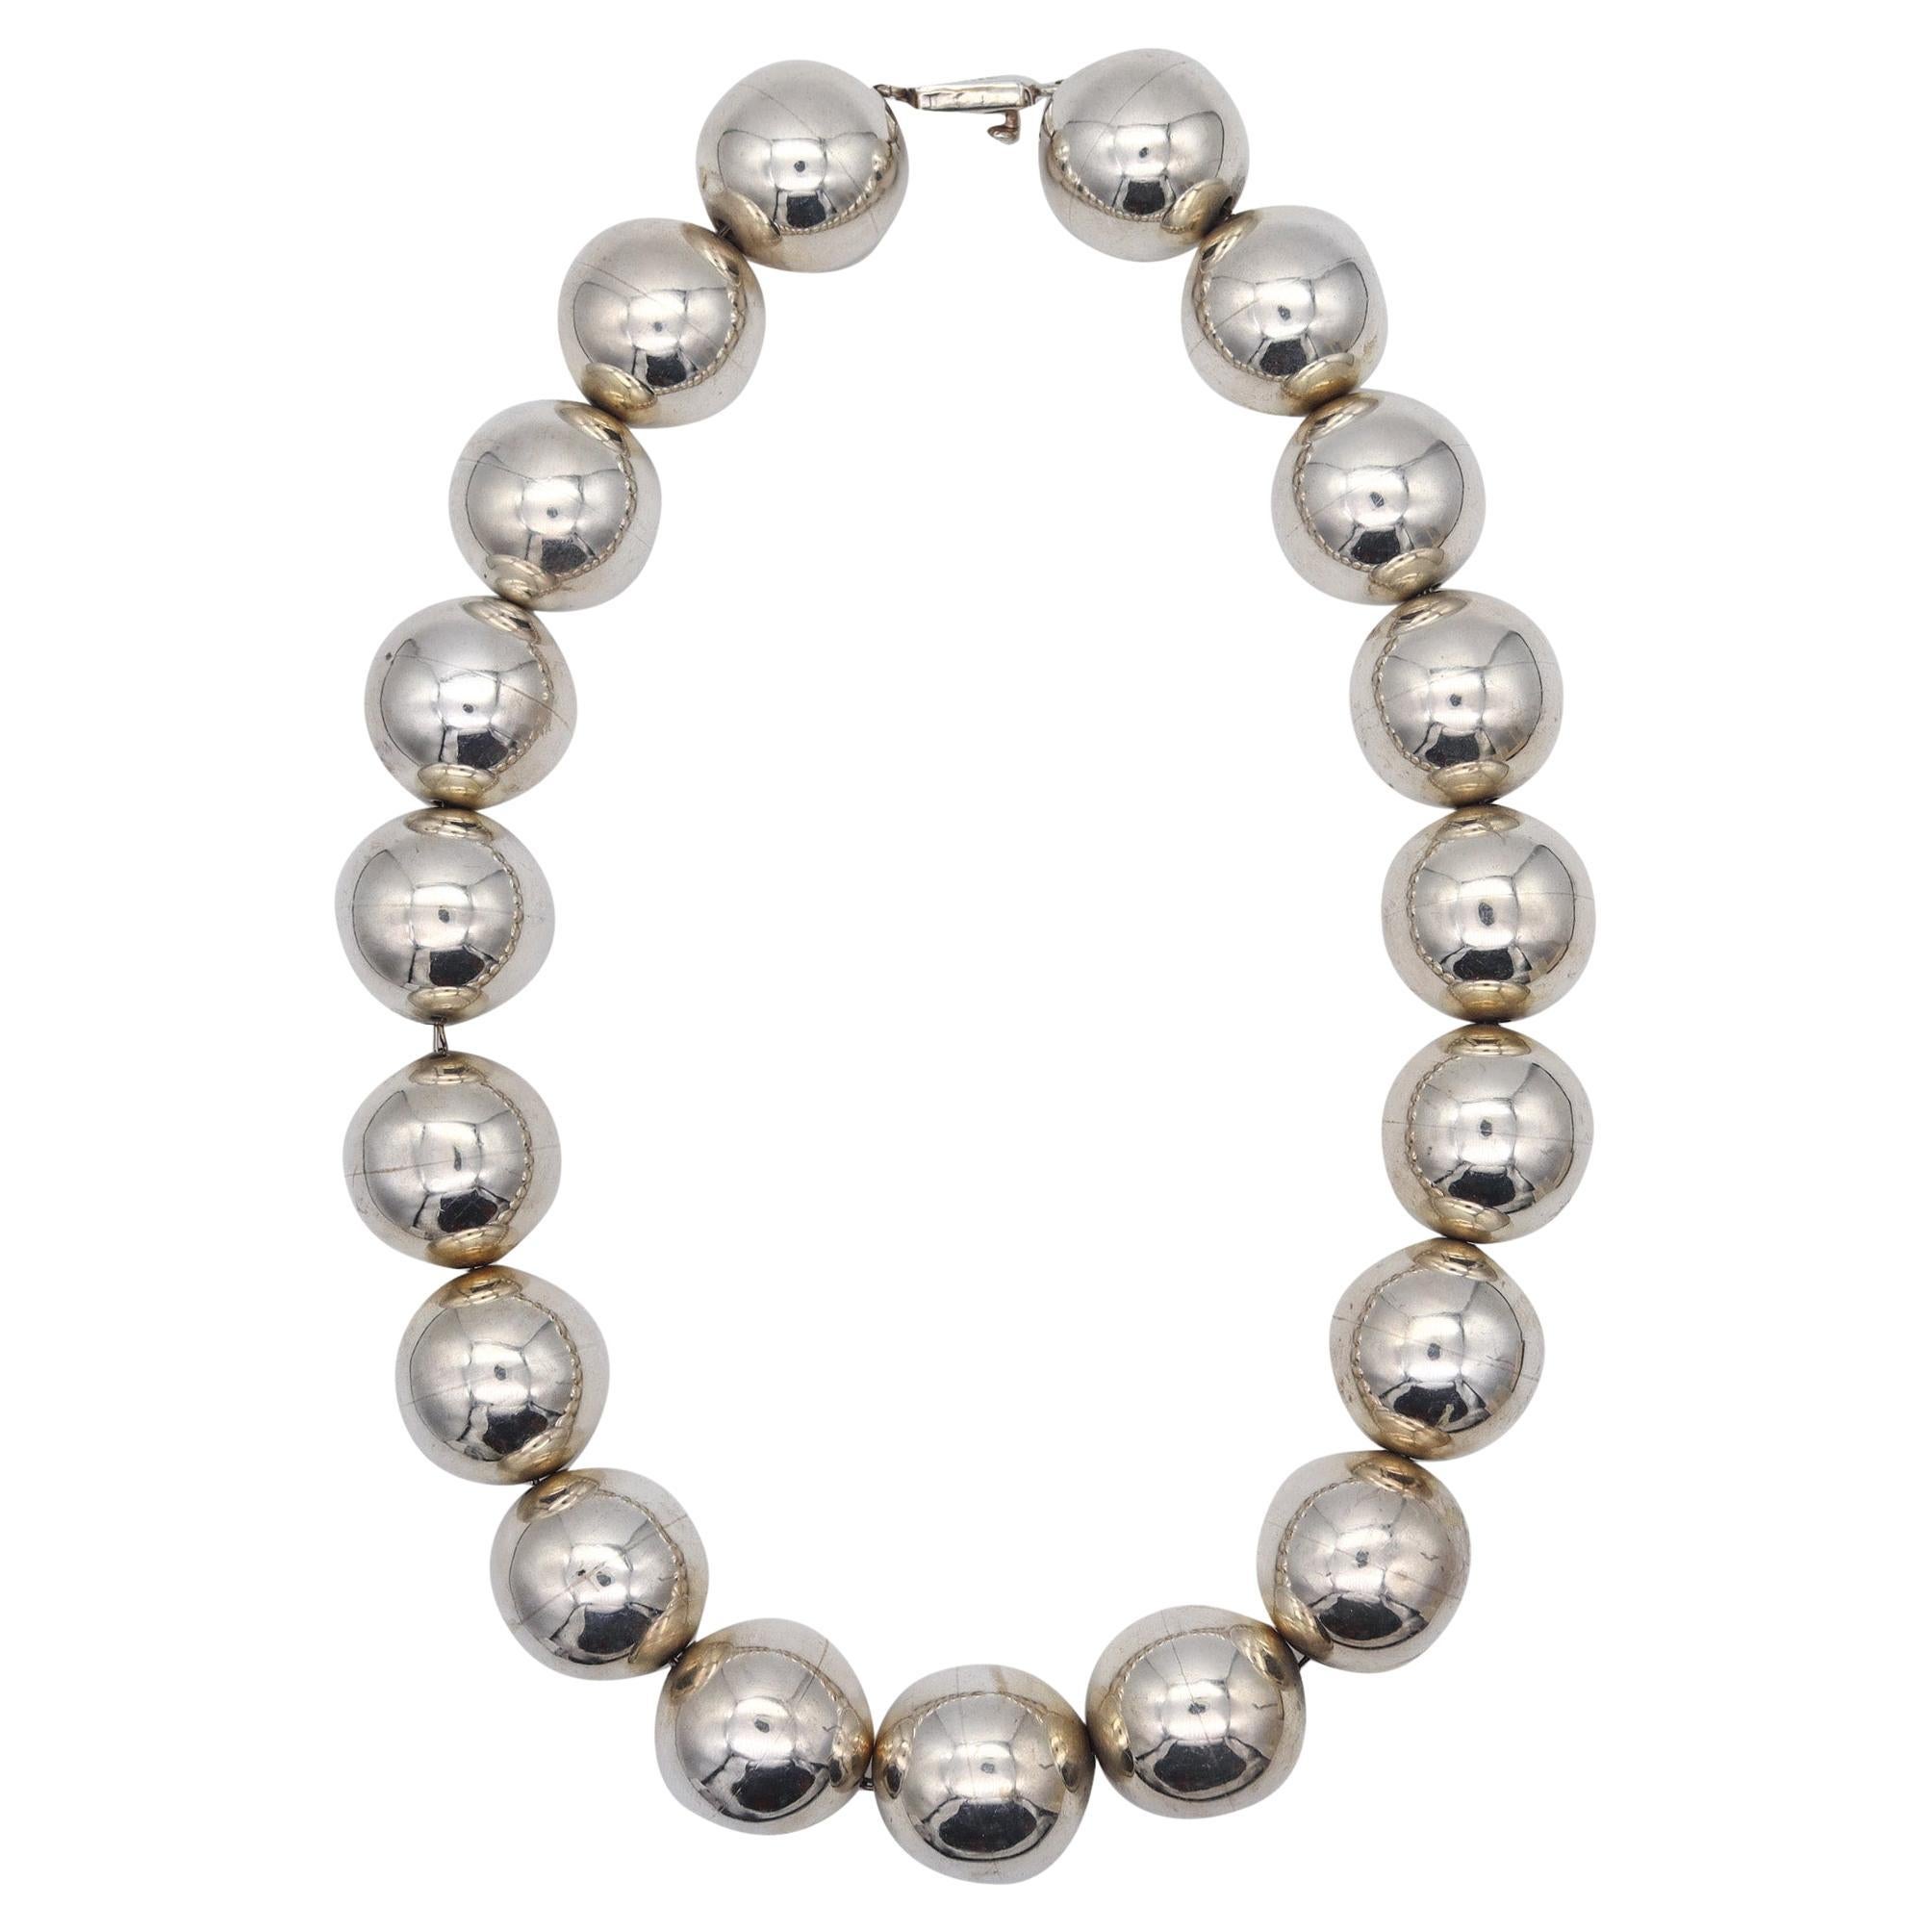 Mexico 1970 Modernist Spherical Balls Necklace in Solid .925 Sterling Silver